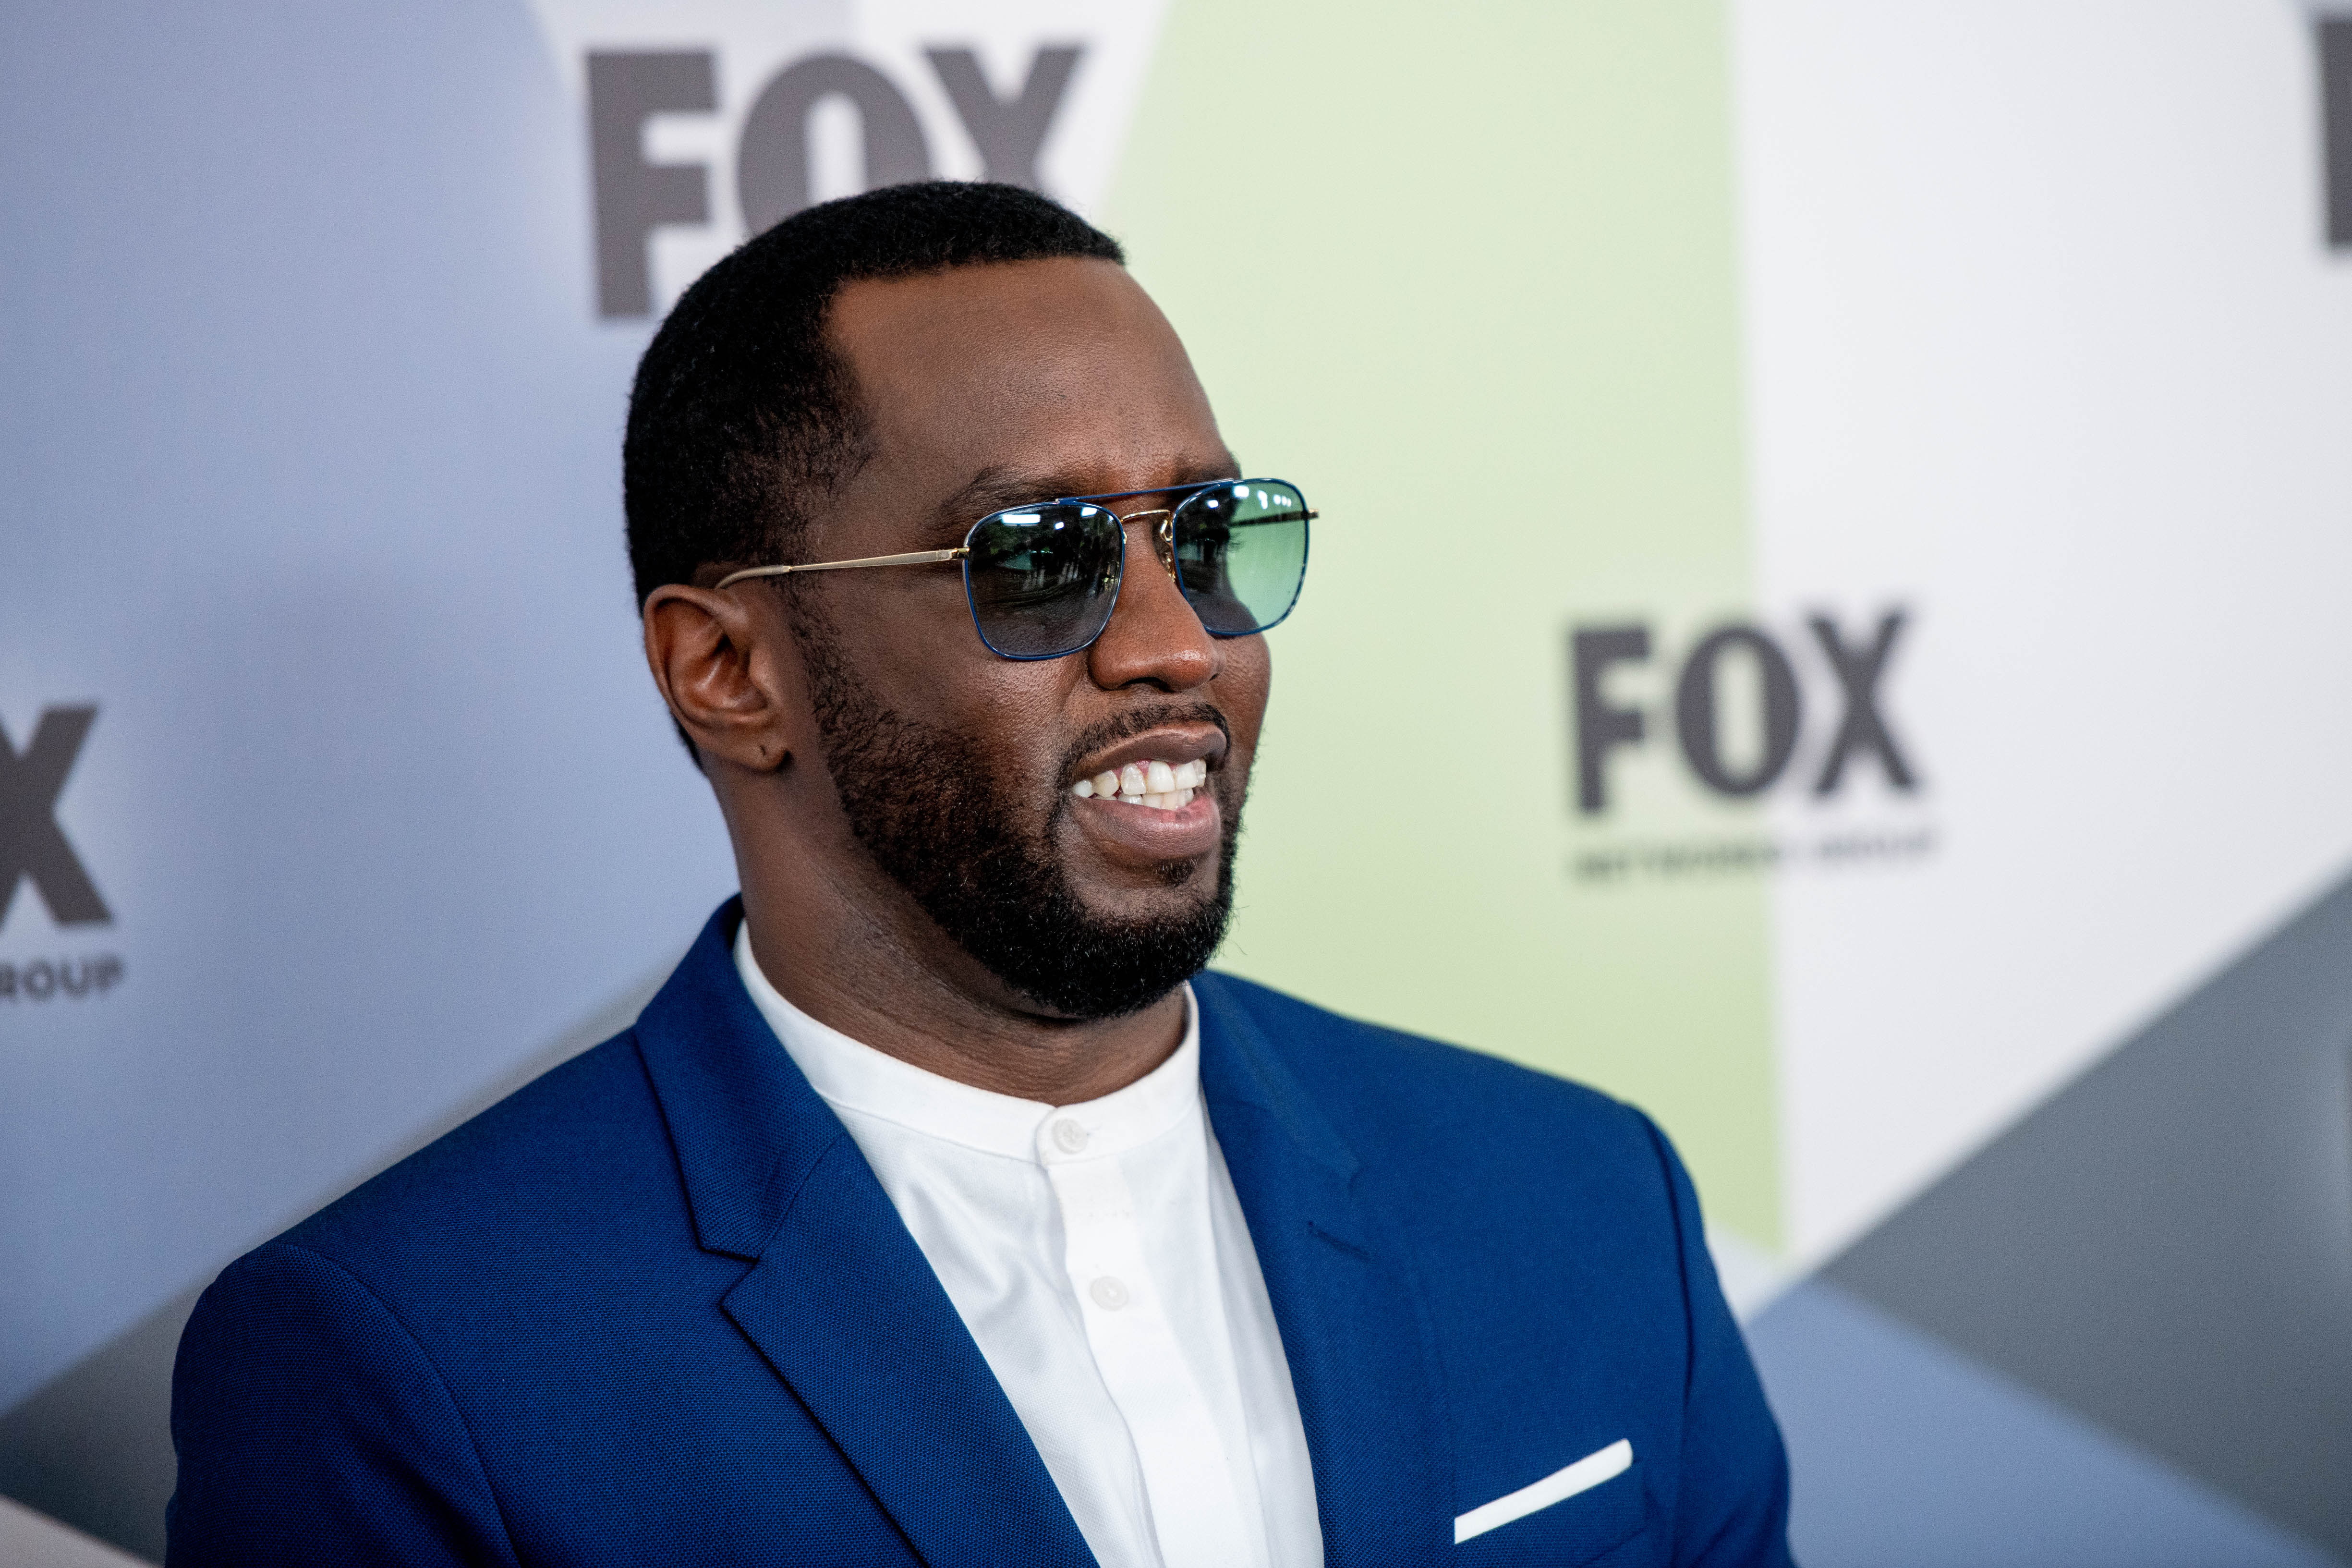 Sean Combs at the 2018 Fox Network Upfront on May 14, 2018 in New York City.|Source: Getty Images